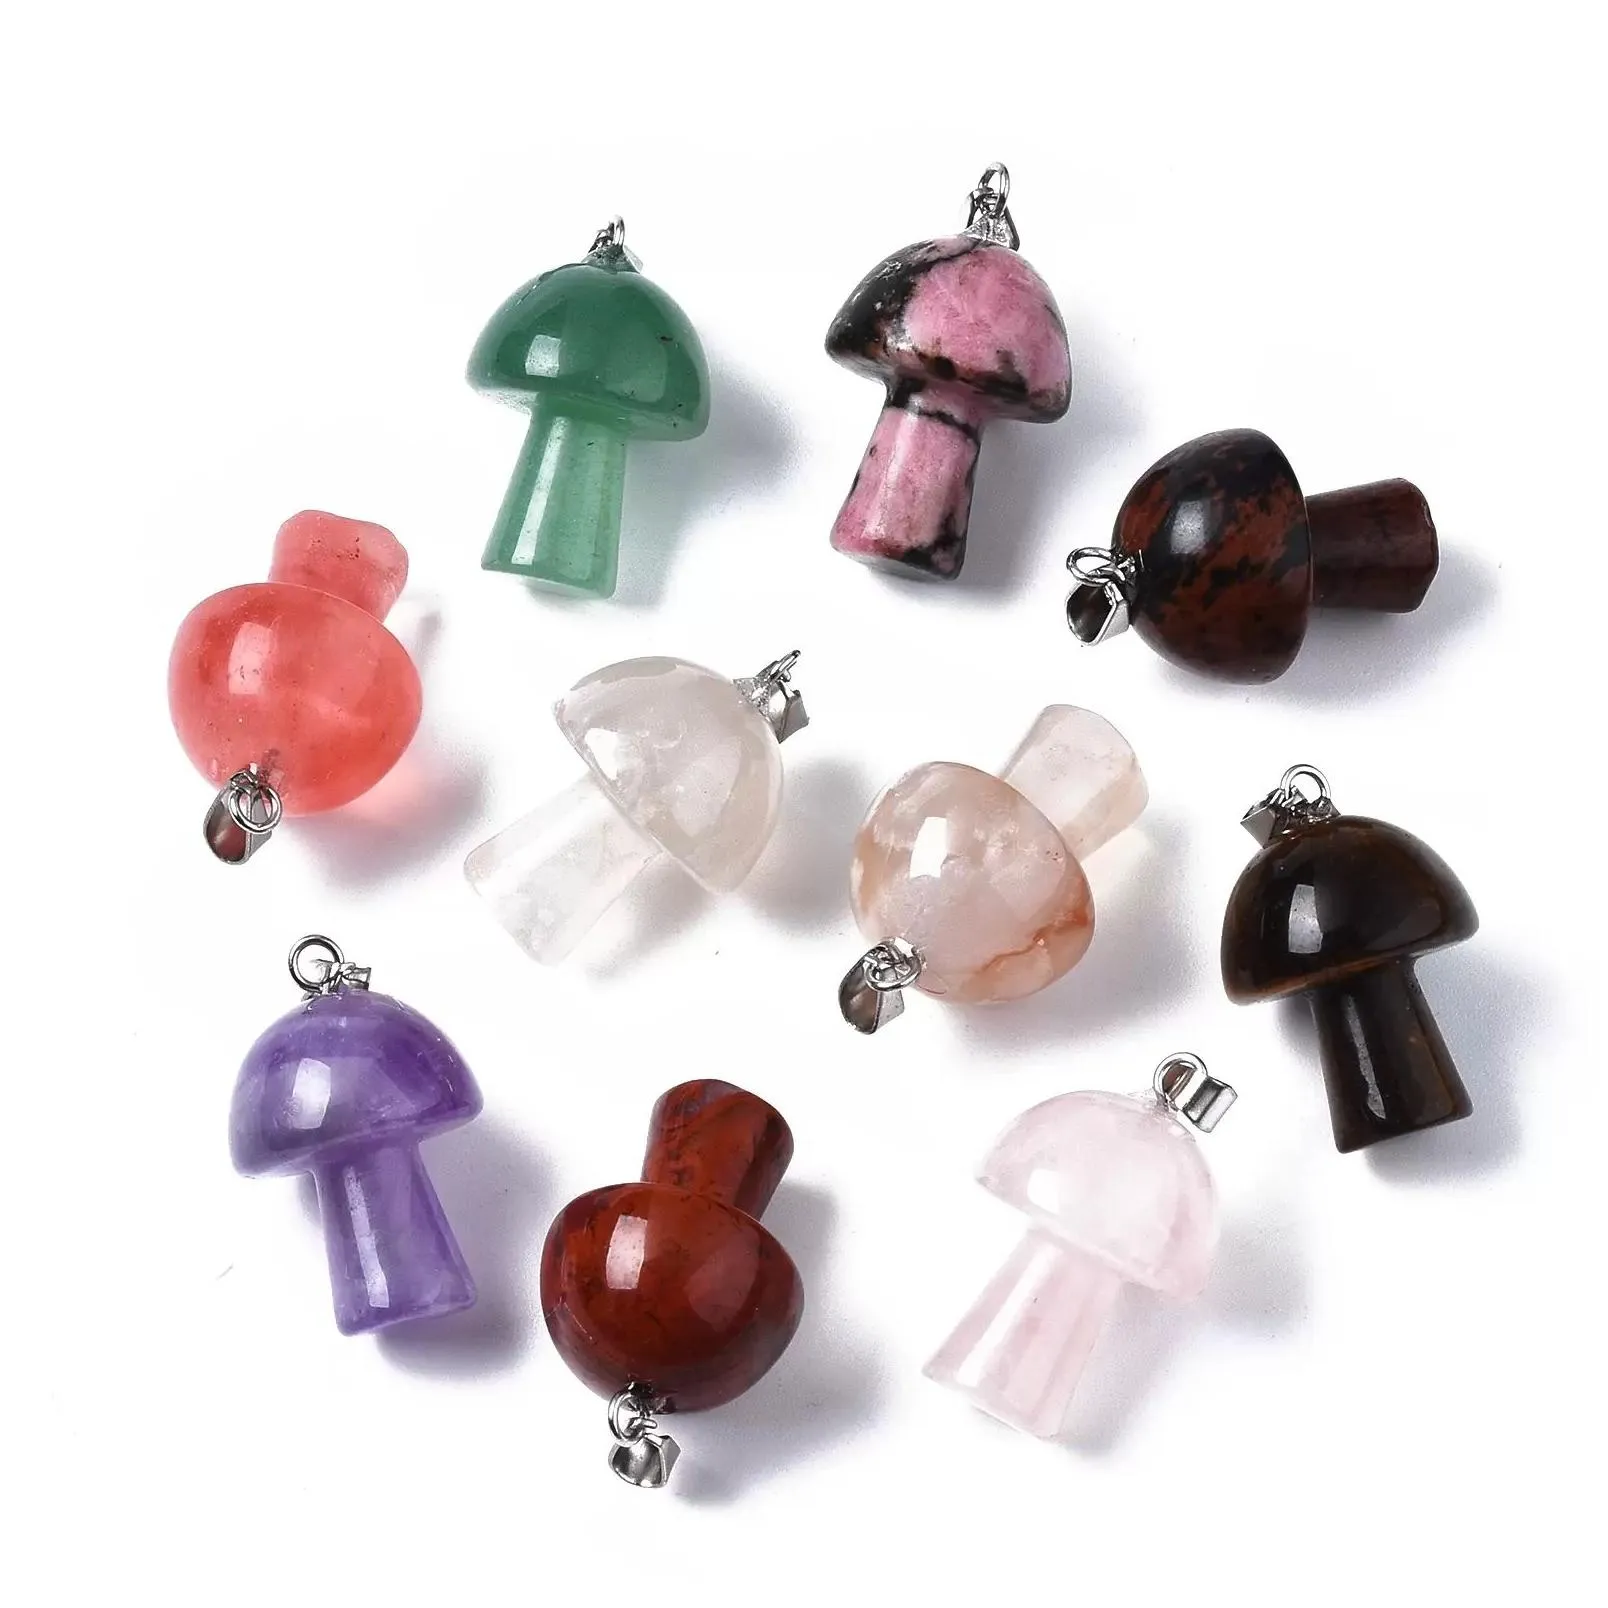 Charms Reiki Mushroom Shape Natural Stone Charms Crystal Agates Charm Pendant For Men Women Fashion Jewelry Making Acc Drop Delivery J Dhmcu